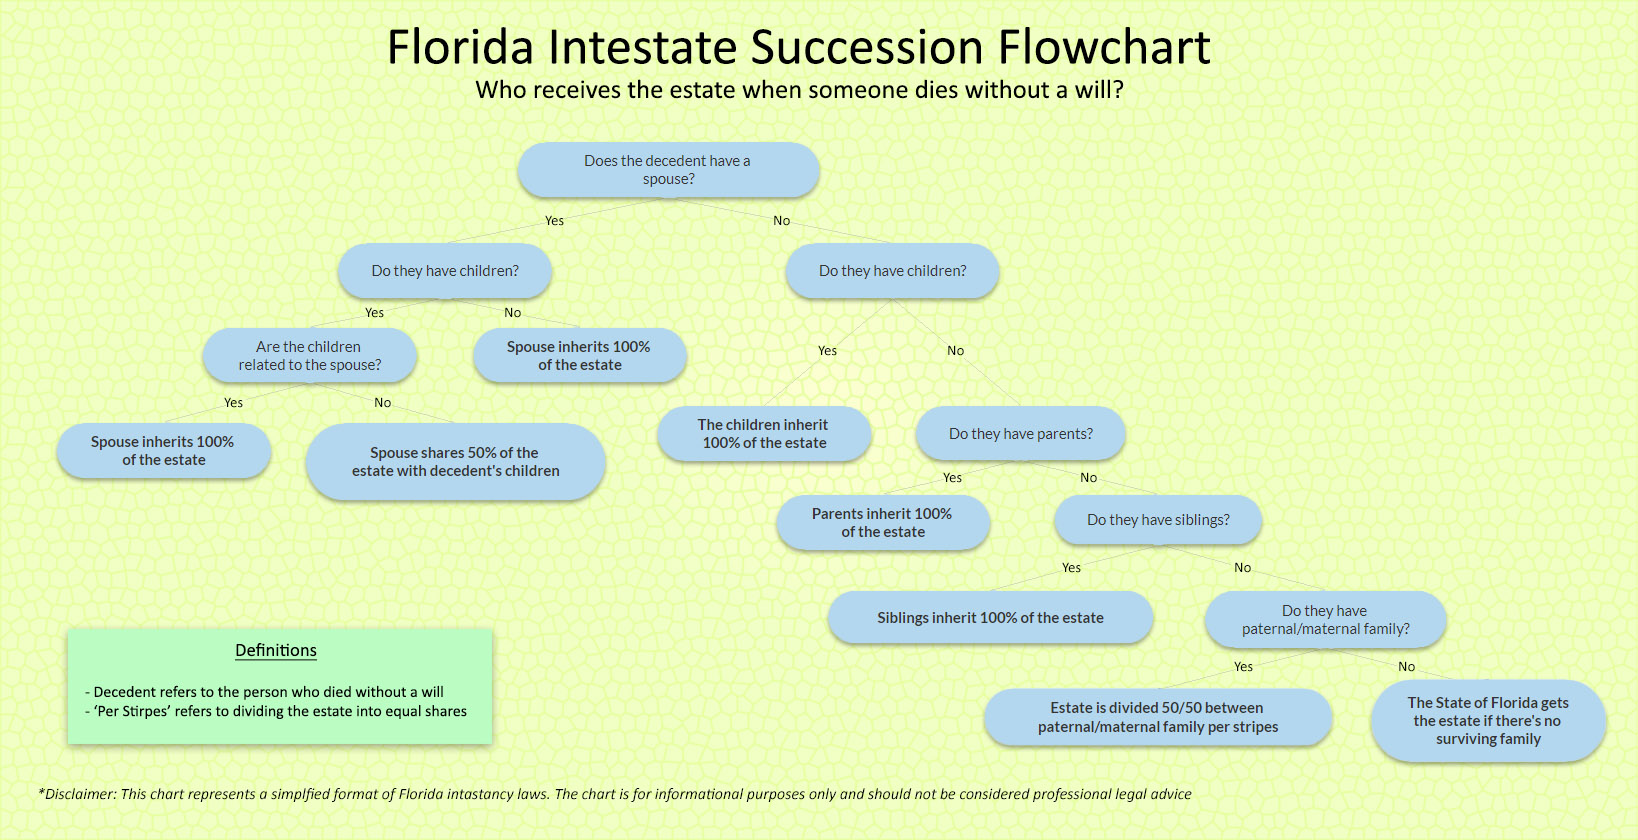 Flowchart representation of Florida intestacy laws for probate without a will. The infographic shows which family member receives the estate starting with the spouse down through the entire paternal and maternal family of the decedent.